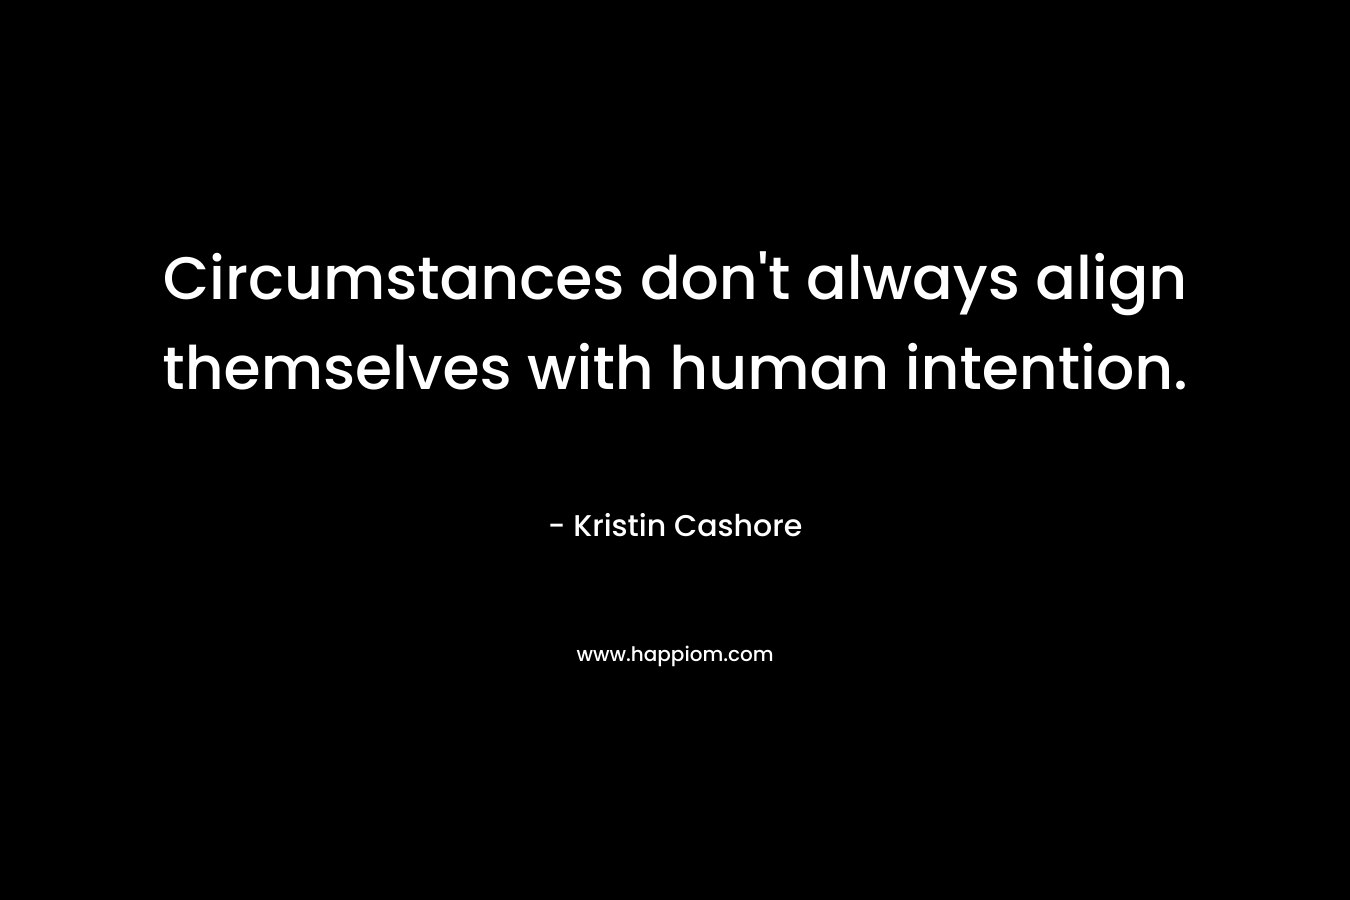 Circumstances don’t always align themselves with human intention. – Kristin Cashore